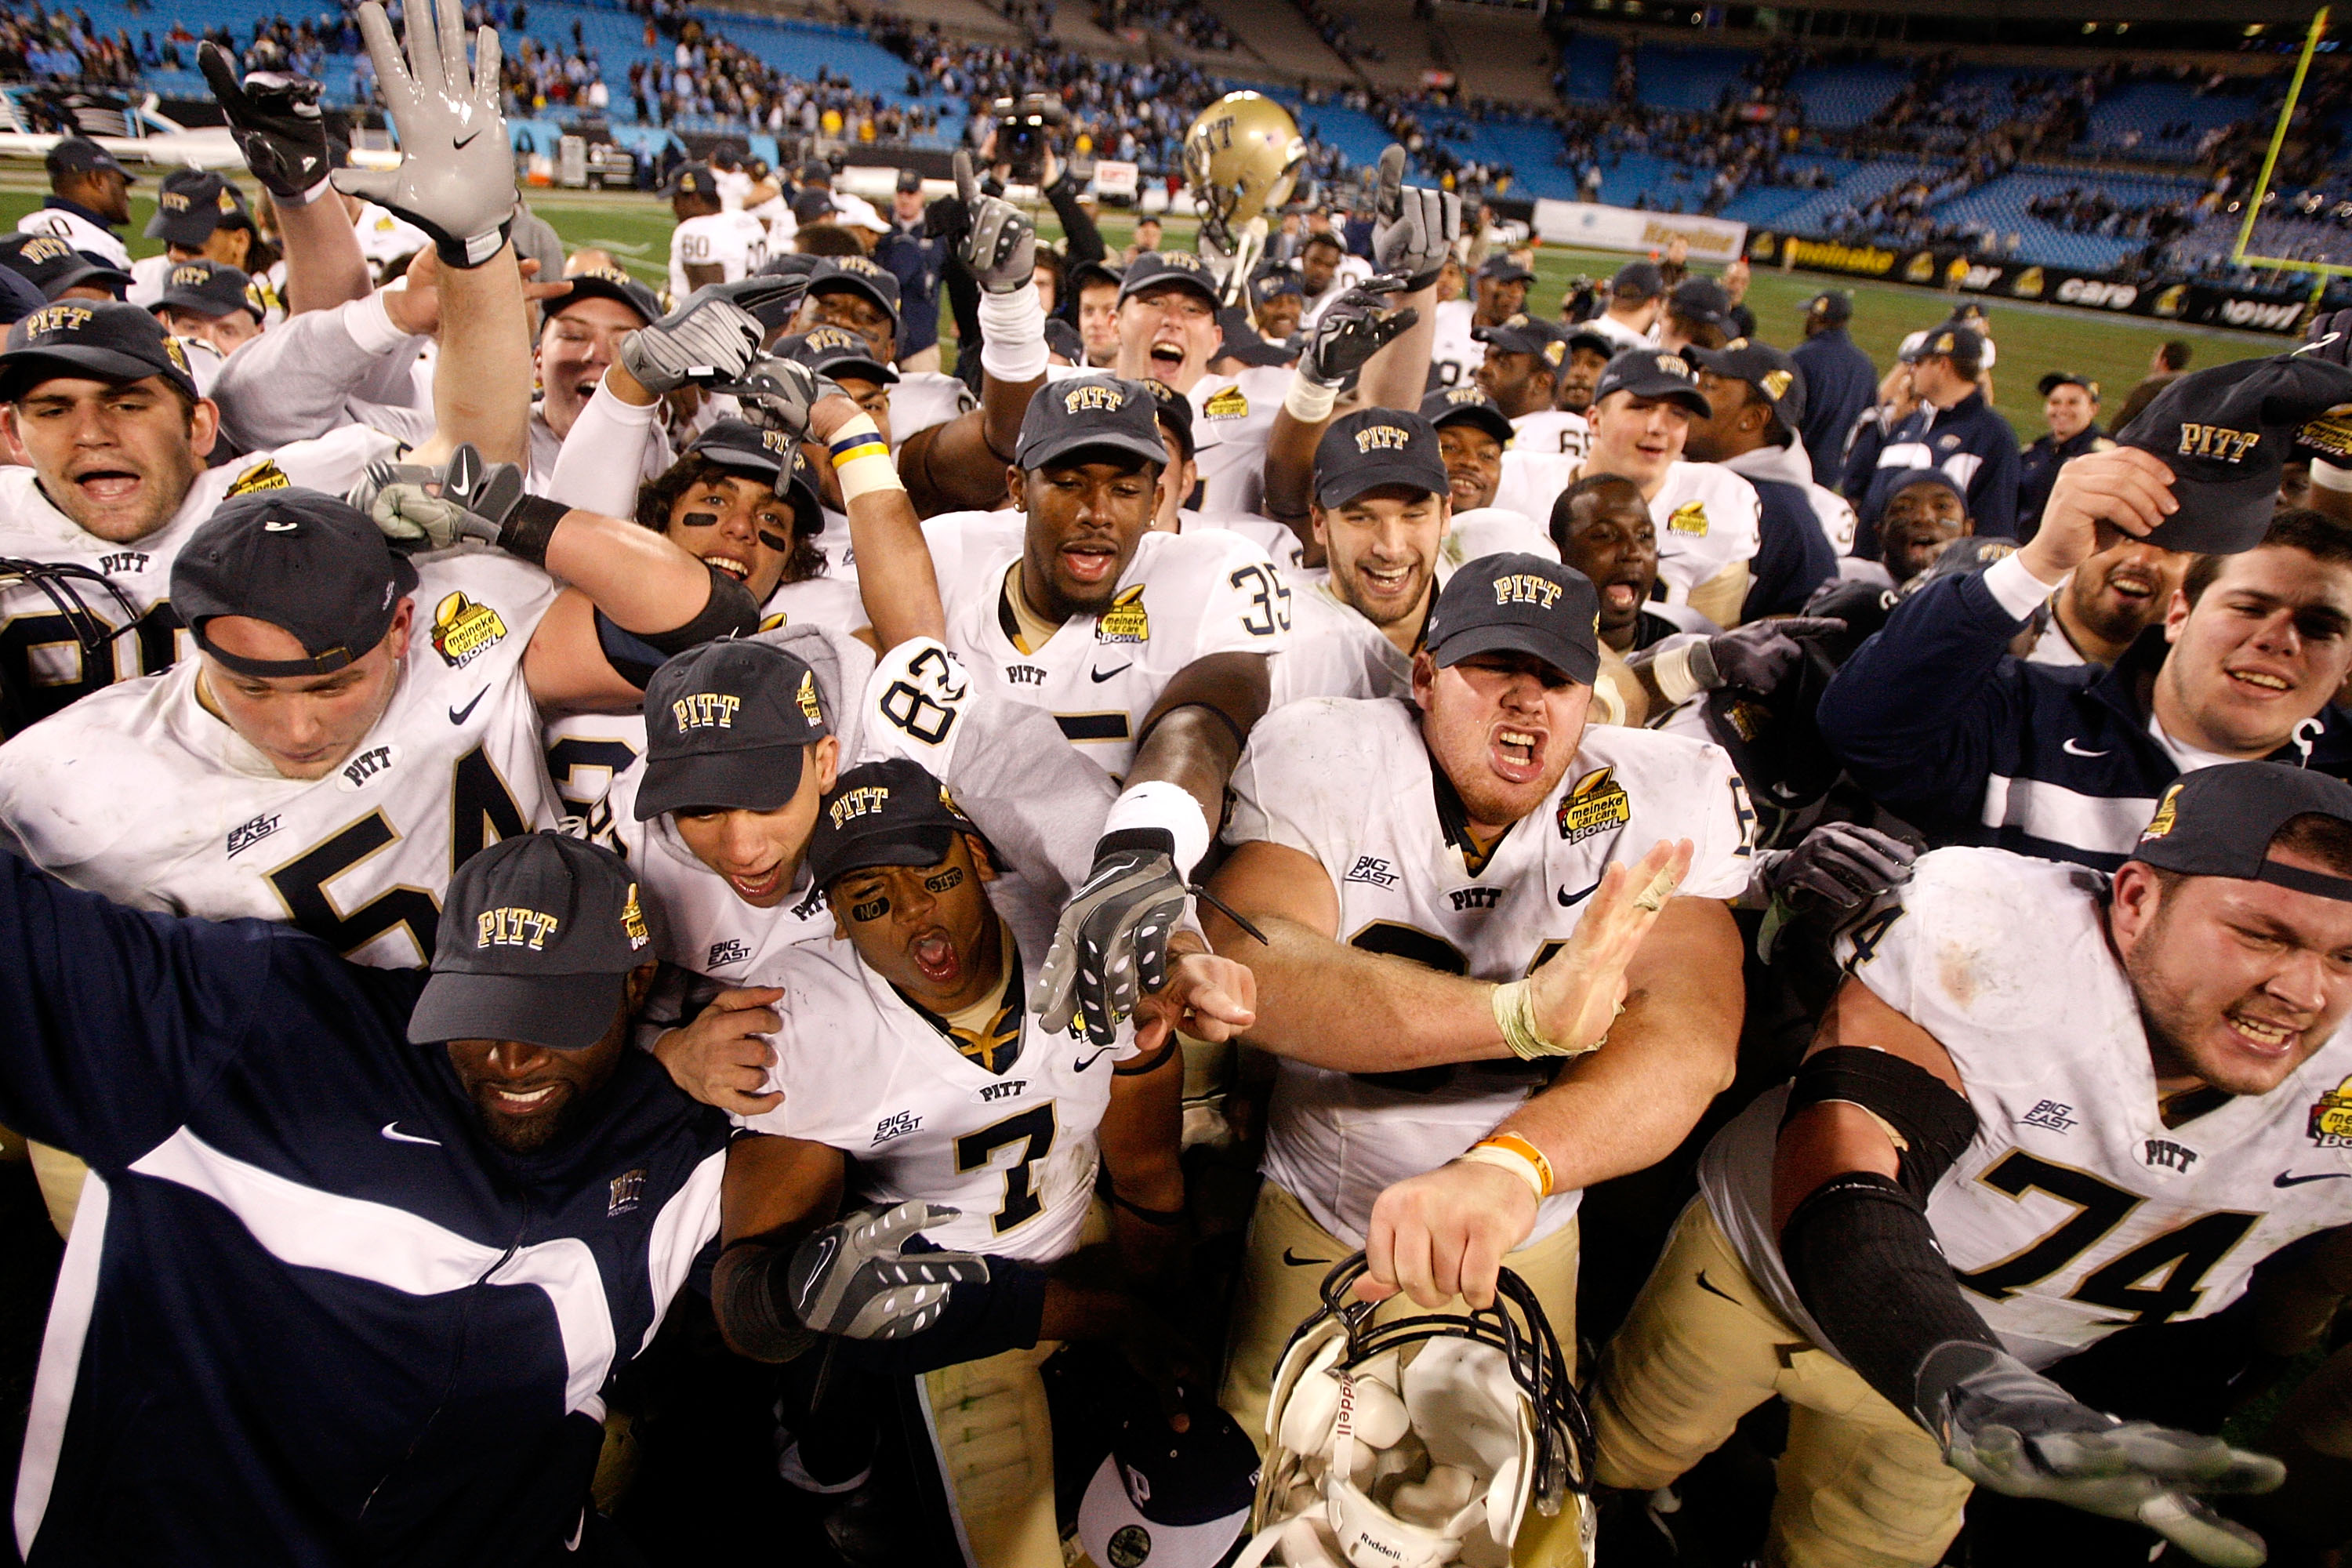 CHARLOTTE, NC - DECEMBER 26:  The Pittsburgh Panthers celebrate a 19-17 victory over the North Carolina Tar Heels after their game on December 26, 2009 in Charlotte, North Carolina.  (Photo by Streeter Lecka/Getty Images)